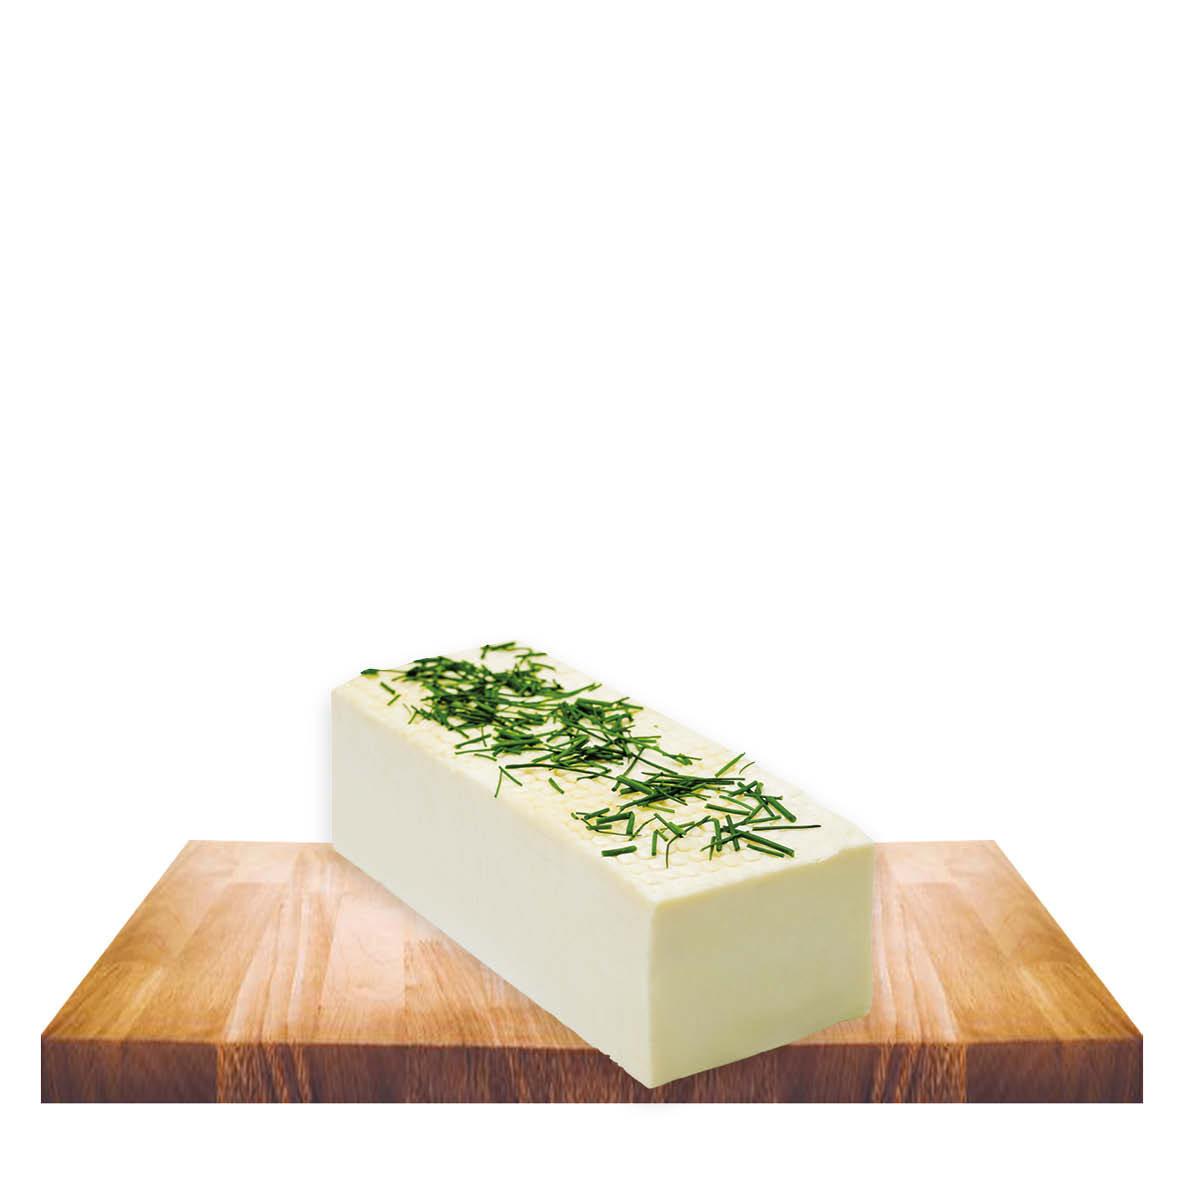 Goat cheese block with chive